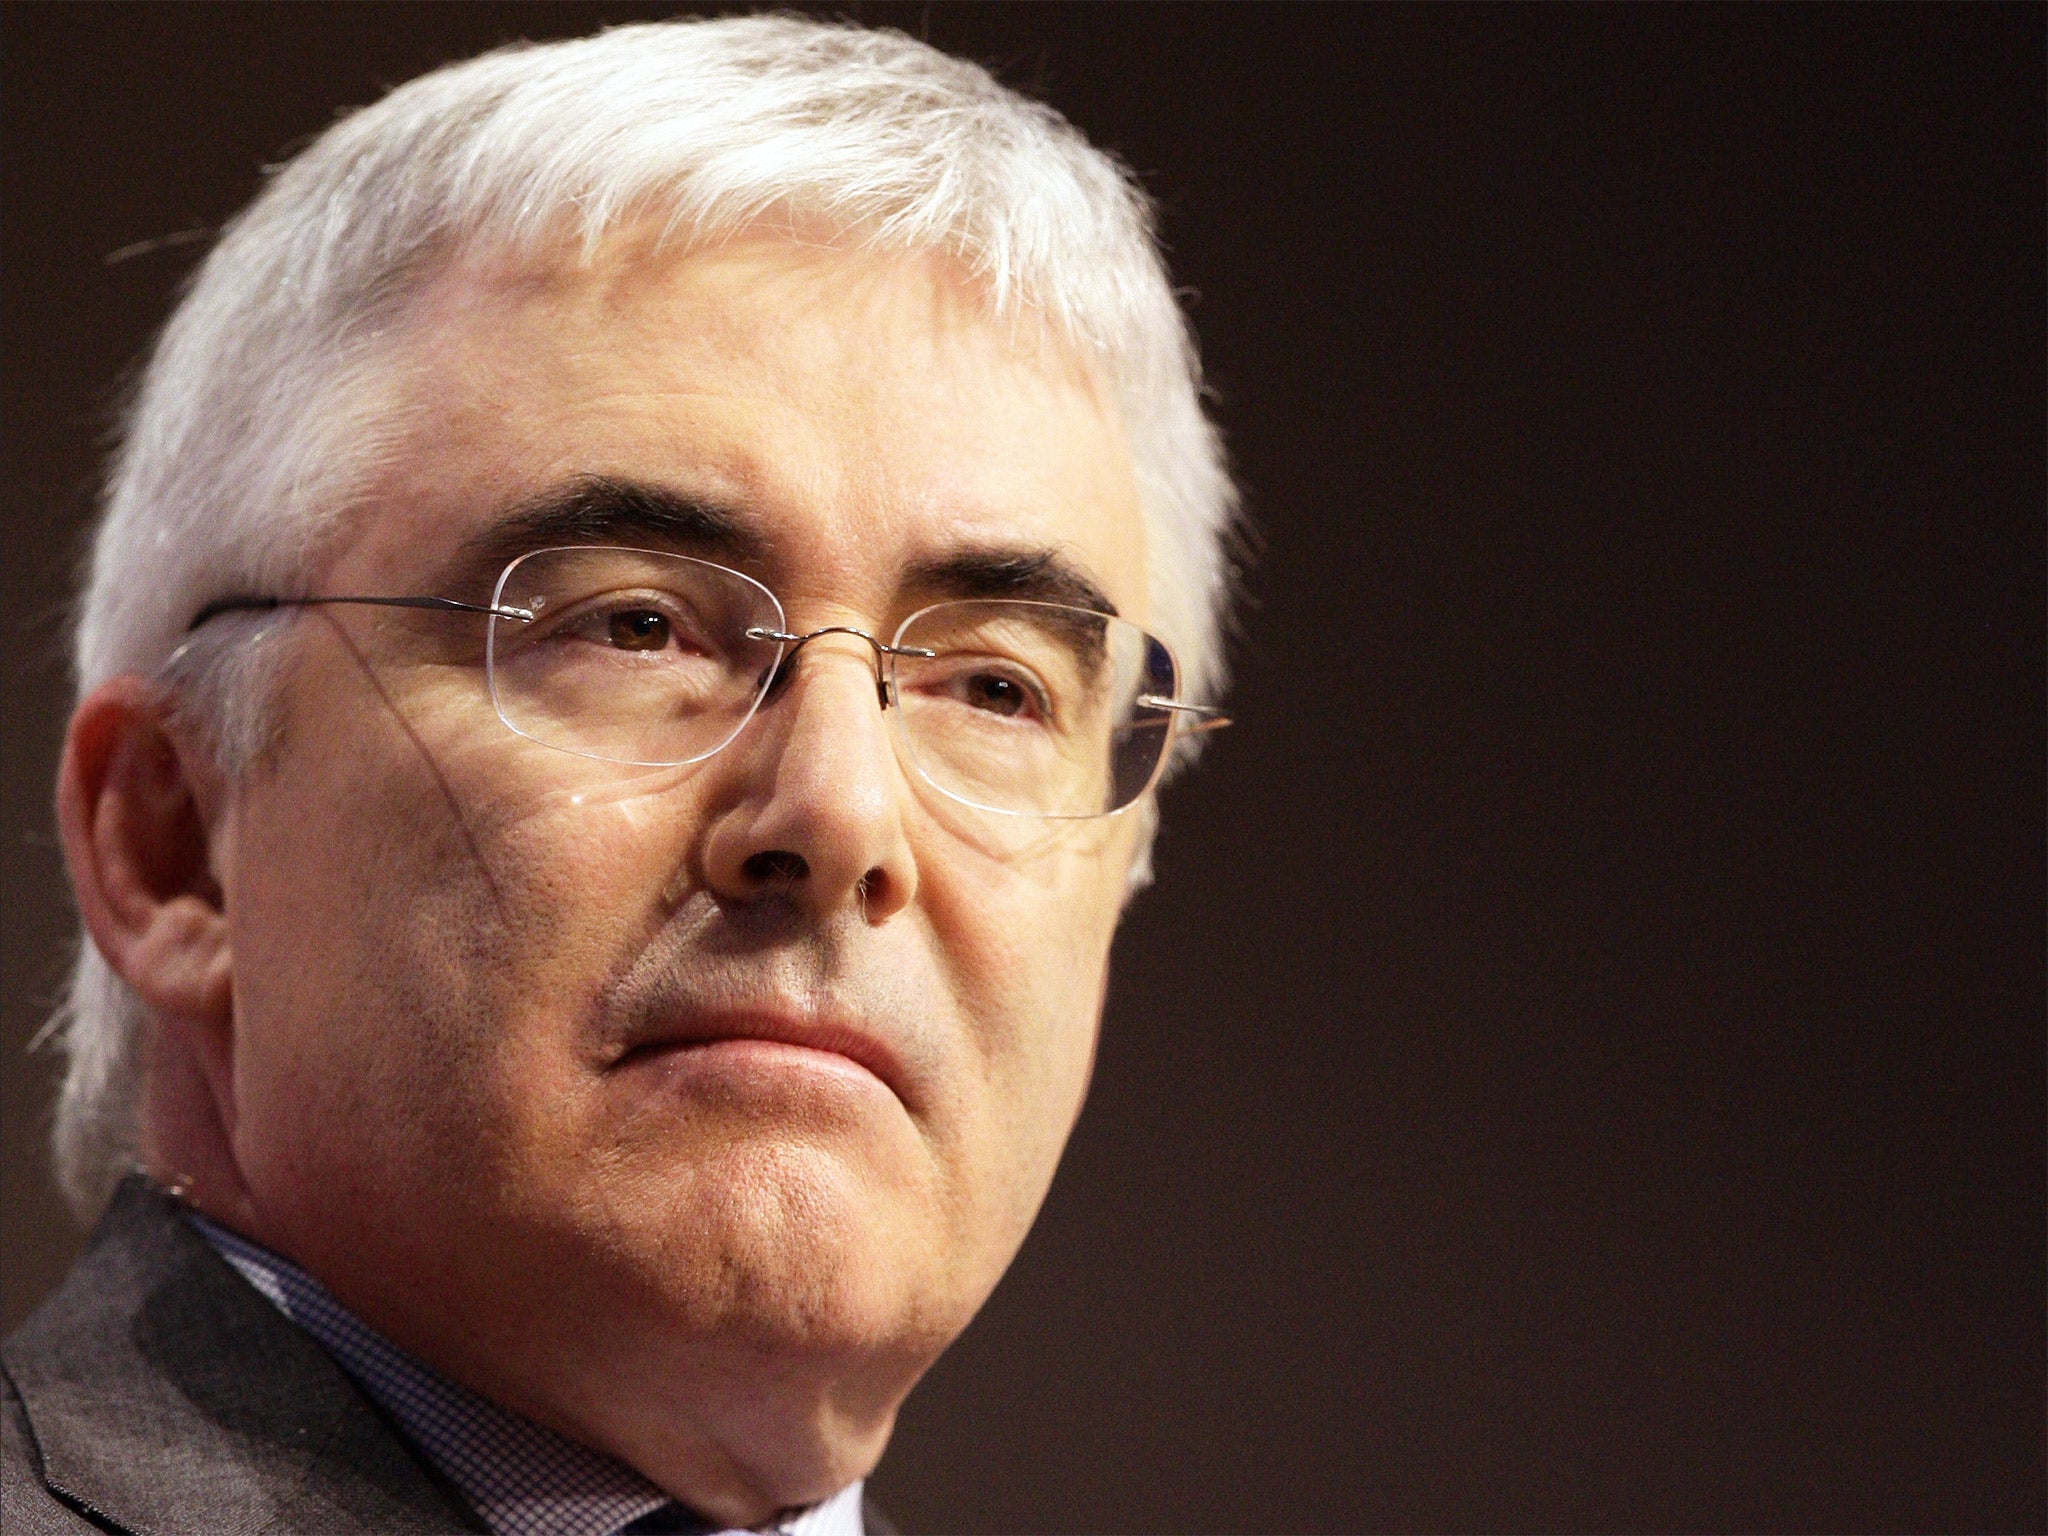 Lord Freud suggested that some disabled people are 'not worth' the minimum wage